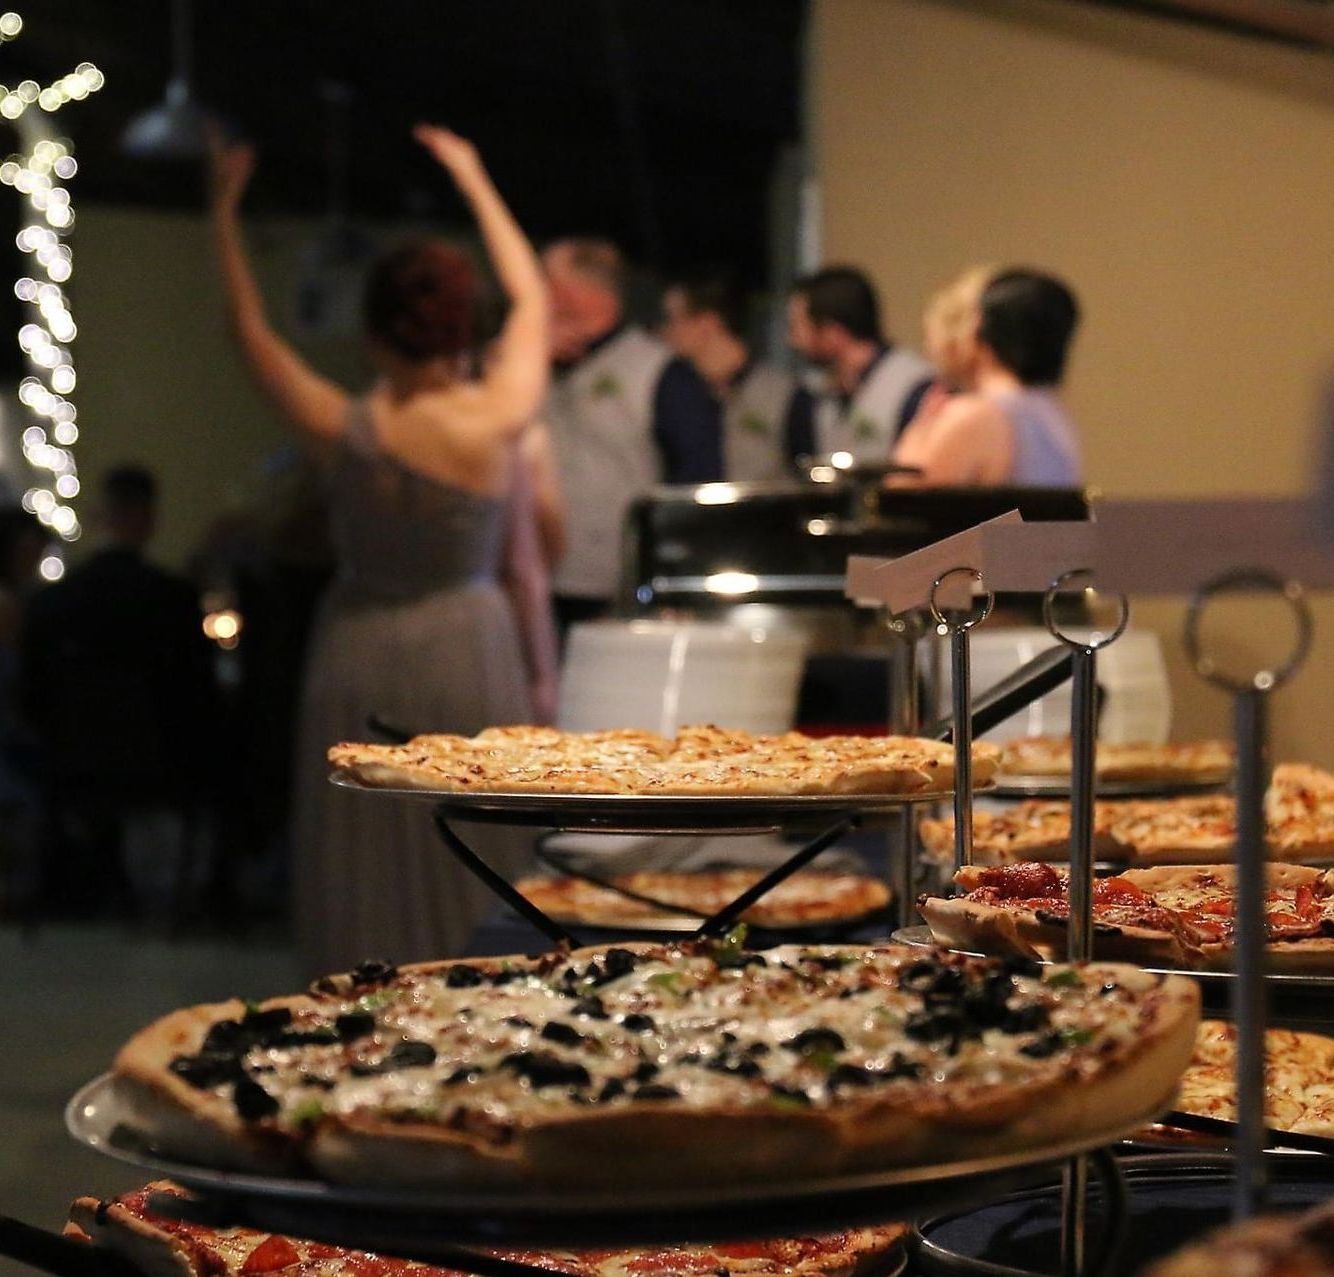 a group of people are dancing in the background behind a display of pizzas